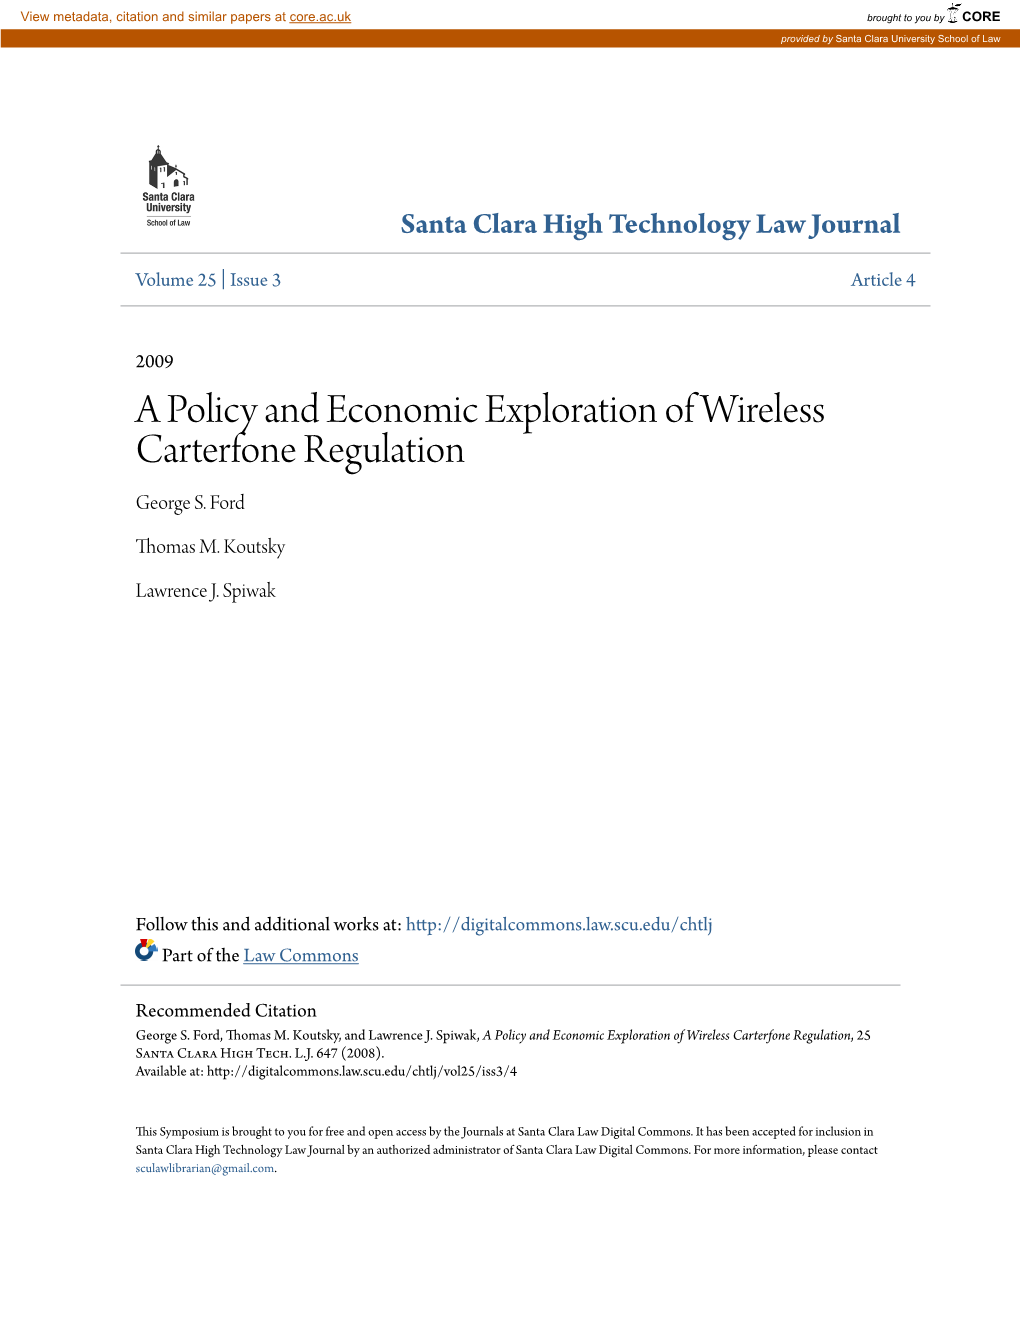 A Policy and Economic Exploration of Wireless Carterfone Regulation George S